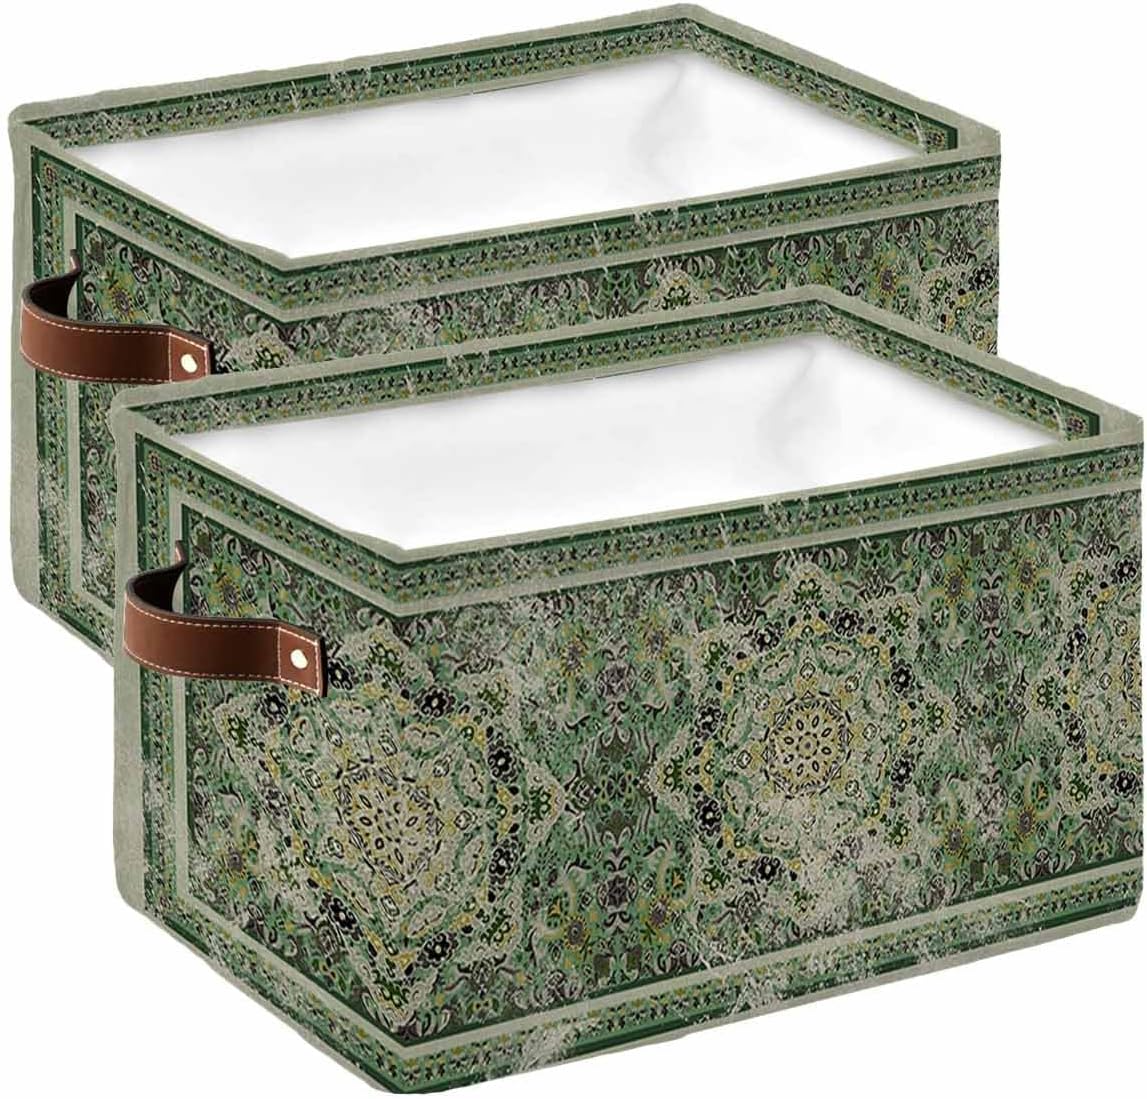 Retro Green Floral Cube Storage Organizer Bins with Handles,15x11x9.5 Inch Collapsible Canvas Cloth Fabric Storage Basket,Books Toys Bin Boxes,Closet Rustic Tribal Ethnic Bohemian Farmhouse 2 Packs